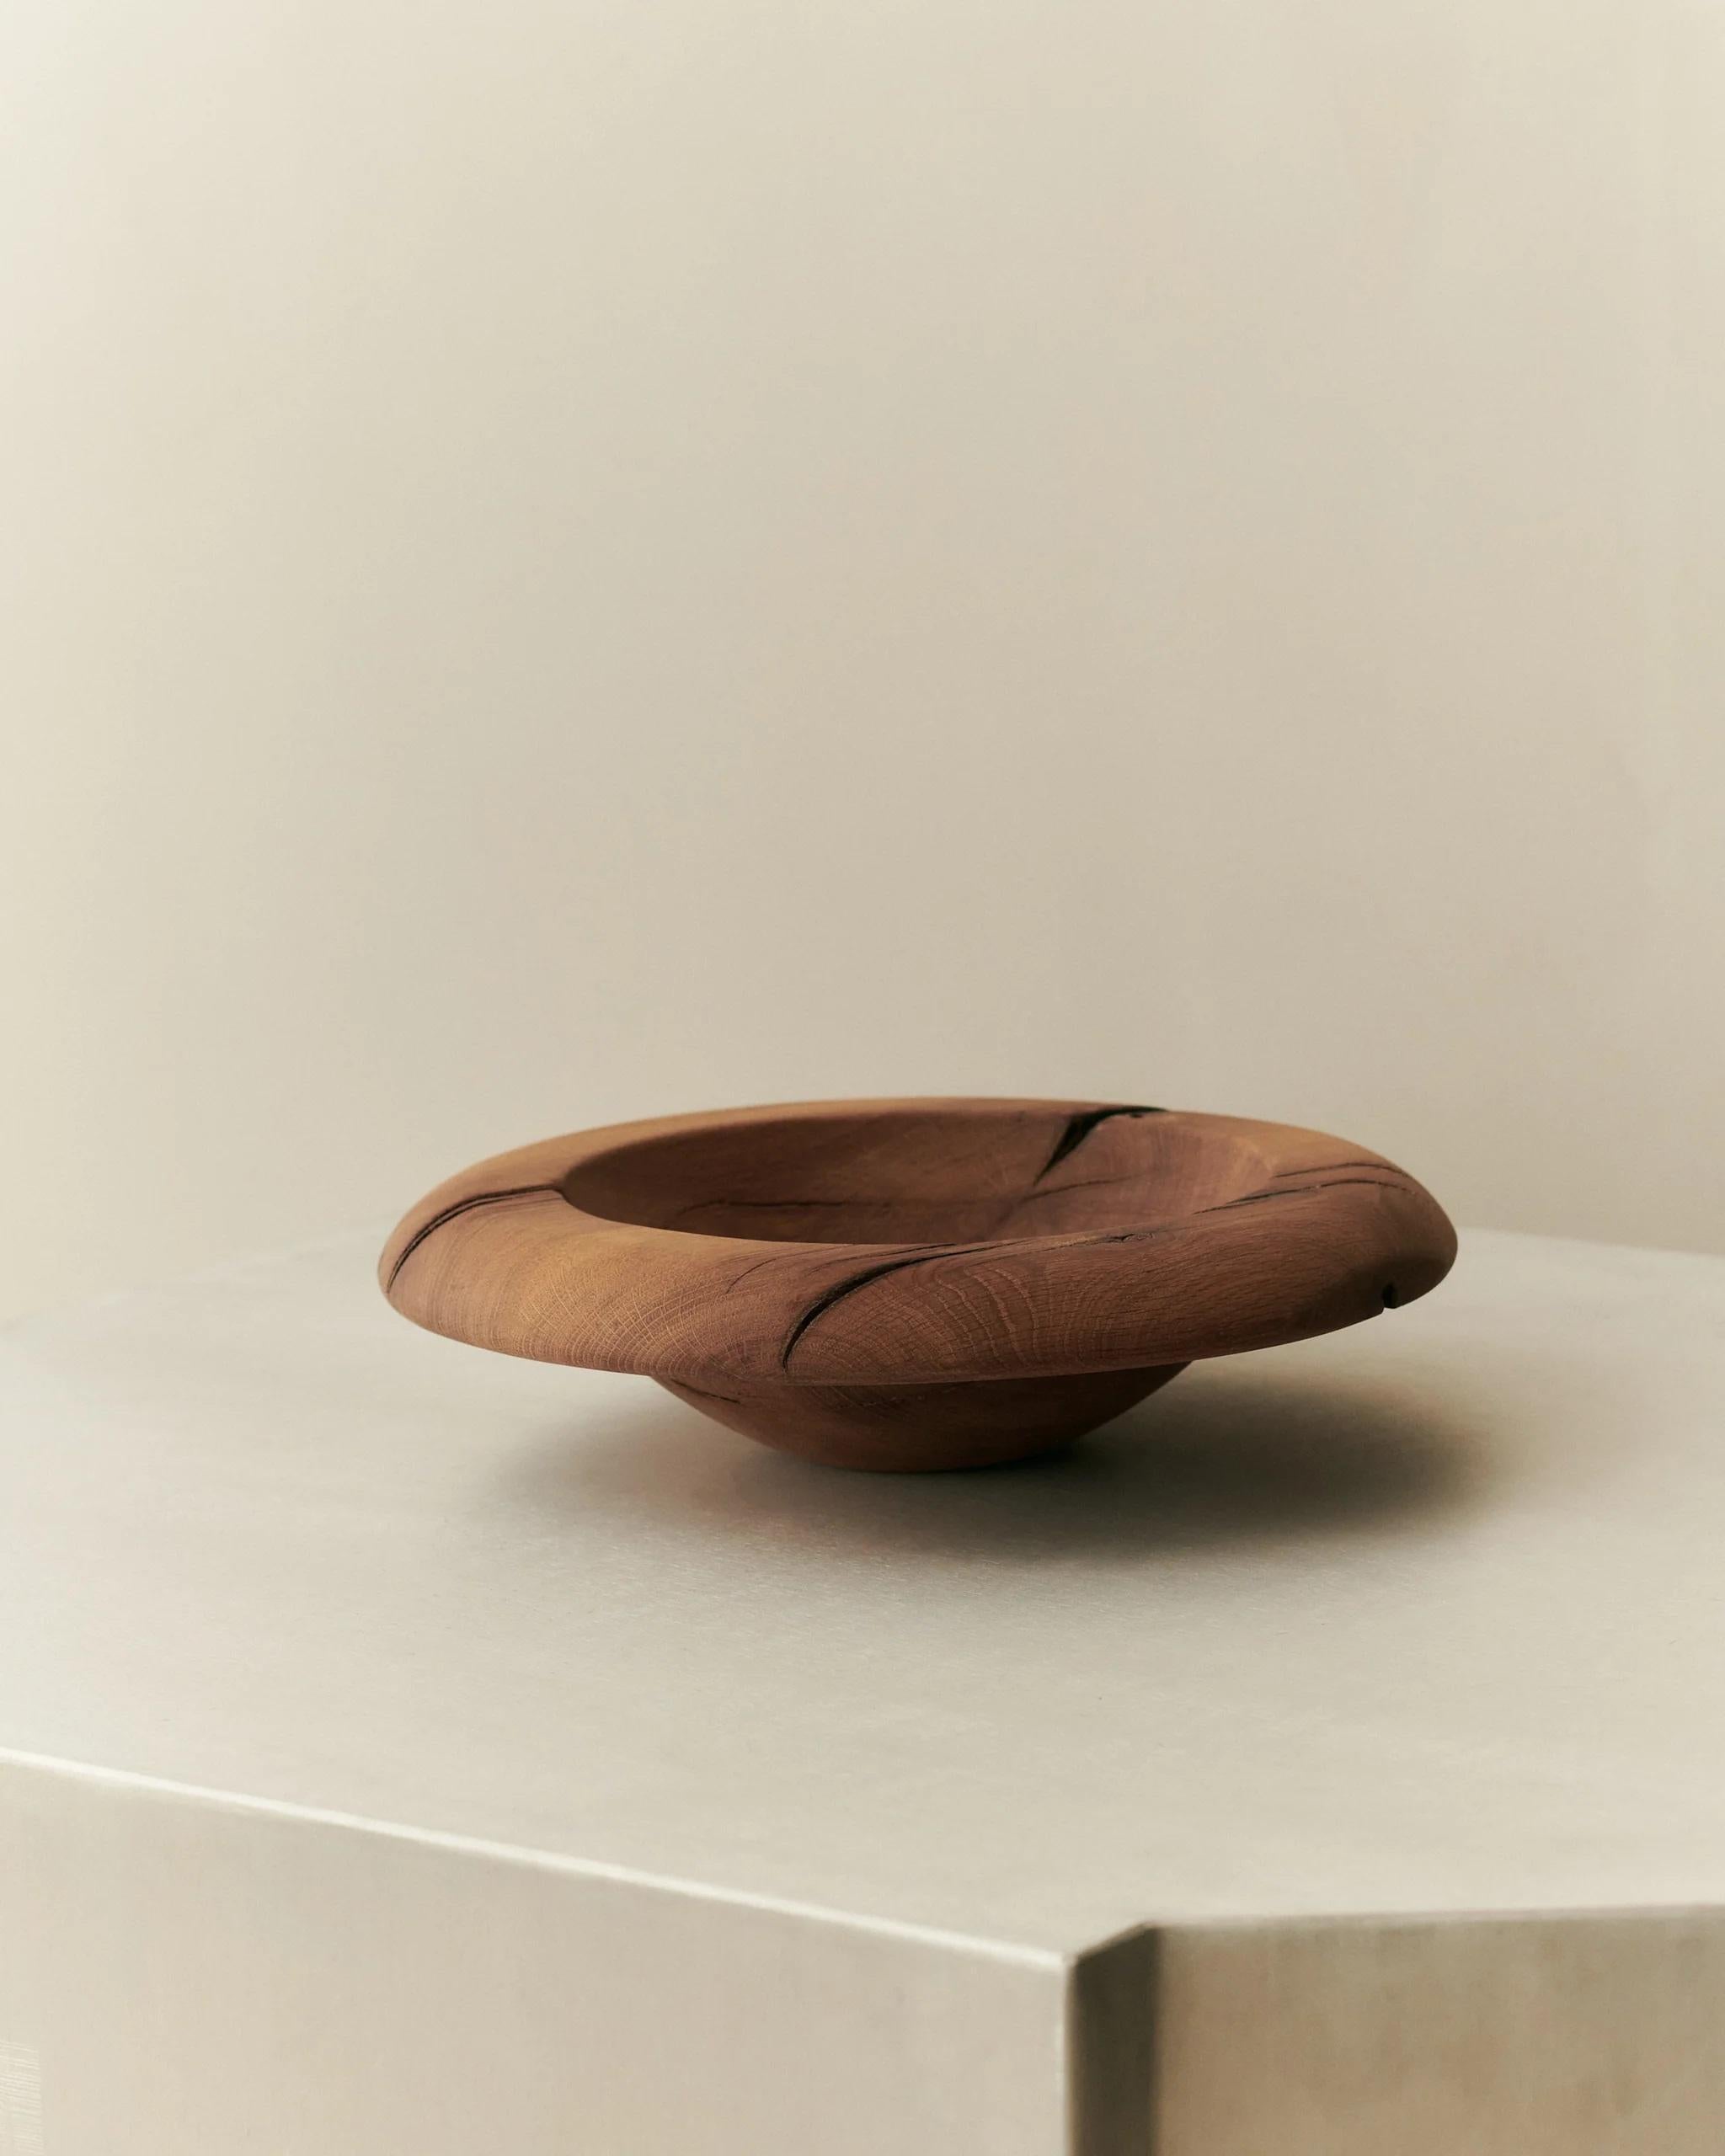 Collar Object 008 by Louise Roe
Dimensions: Ø 48 x H 12,5 cm.
Materials: Aged oak wood.

THE ROE STUDIO COLLAR OBJECT 008
Our Collar Object 008 displays the sincerity of oak wood, stimulating both the tactile and visionary senses. This artistic